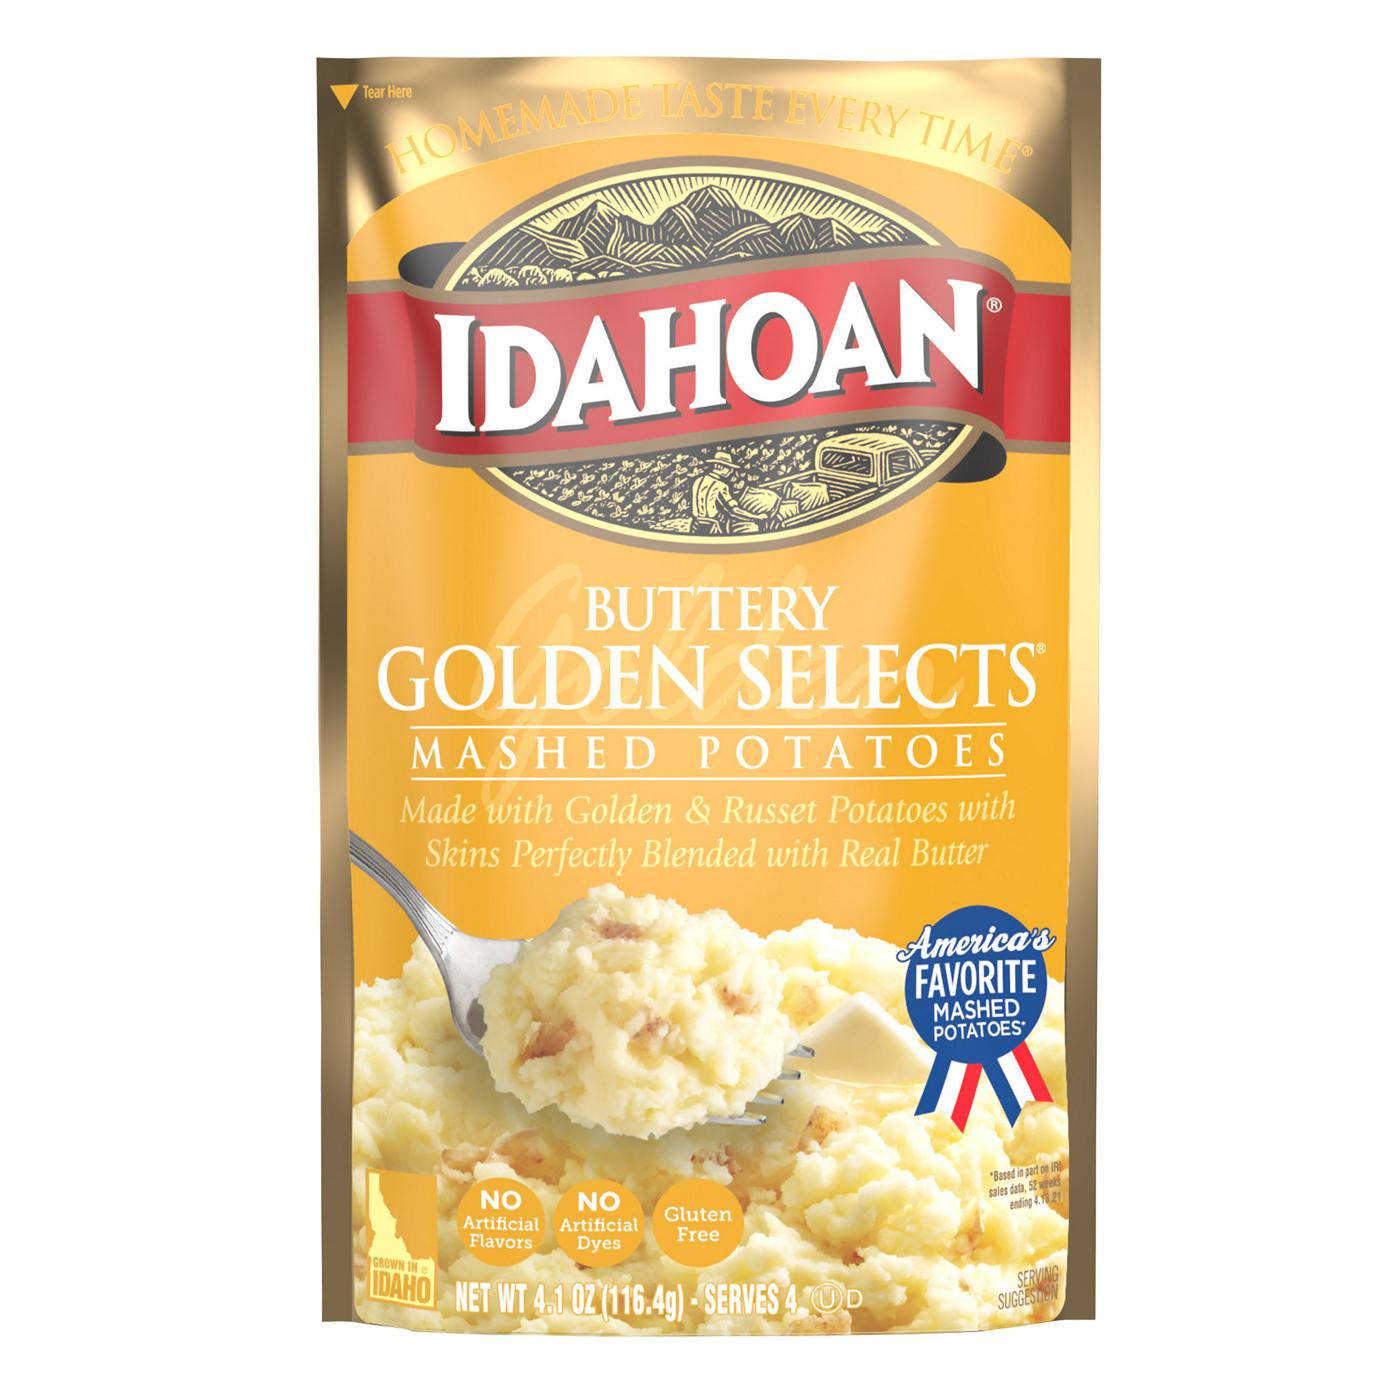 Idahoan Buttery Golden Selects Mashed Potatoes; image 1 of 4